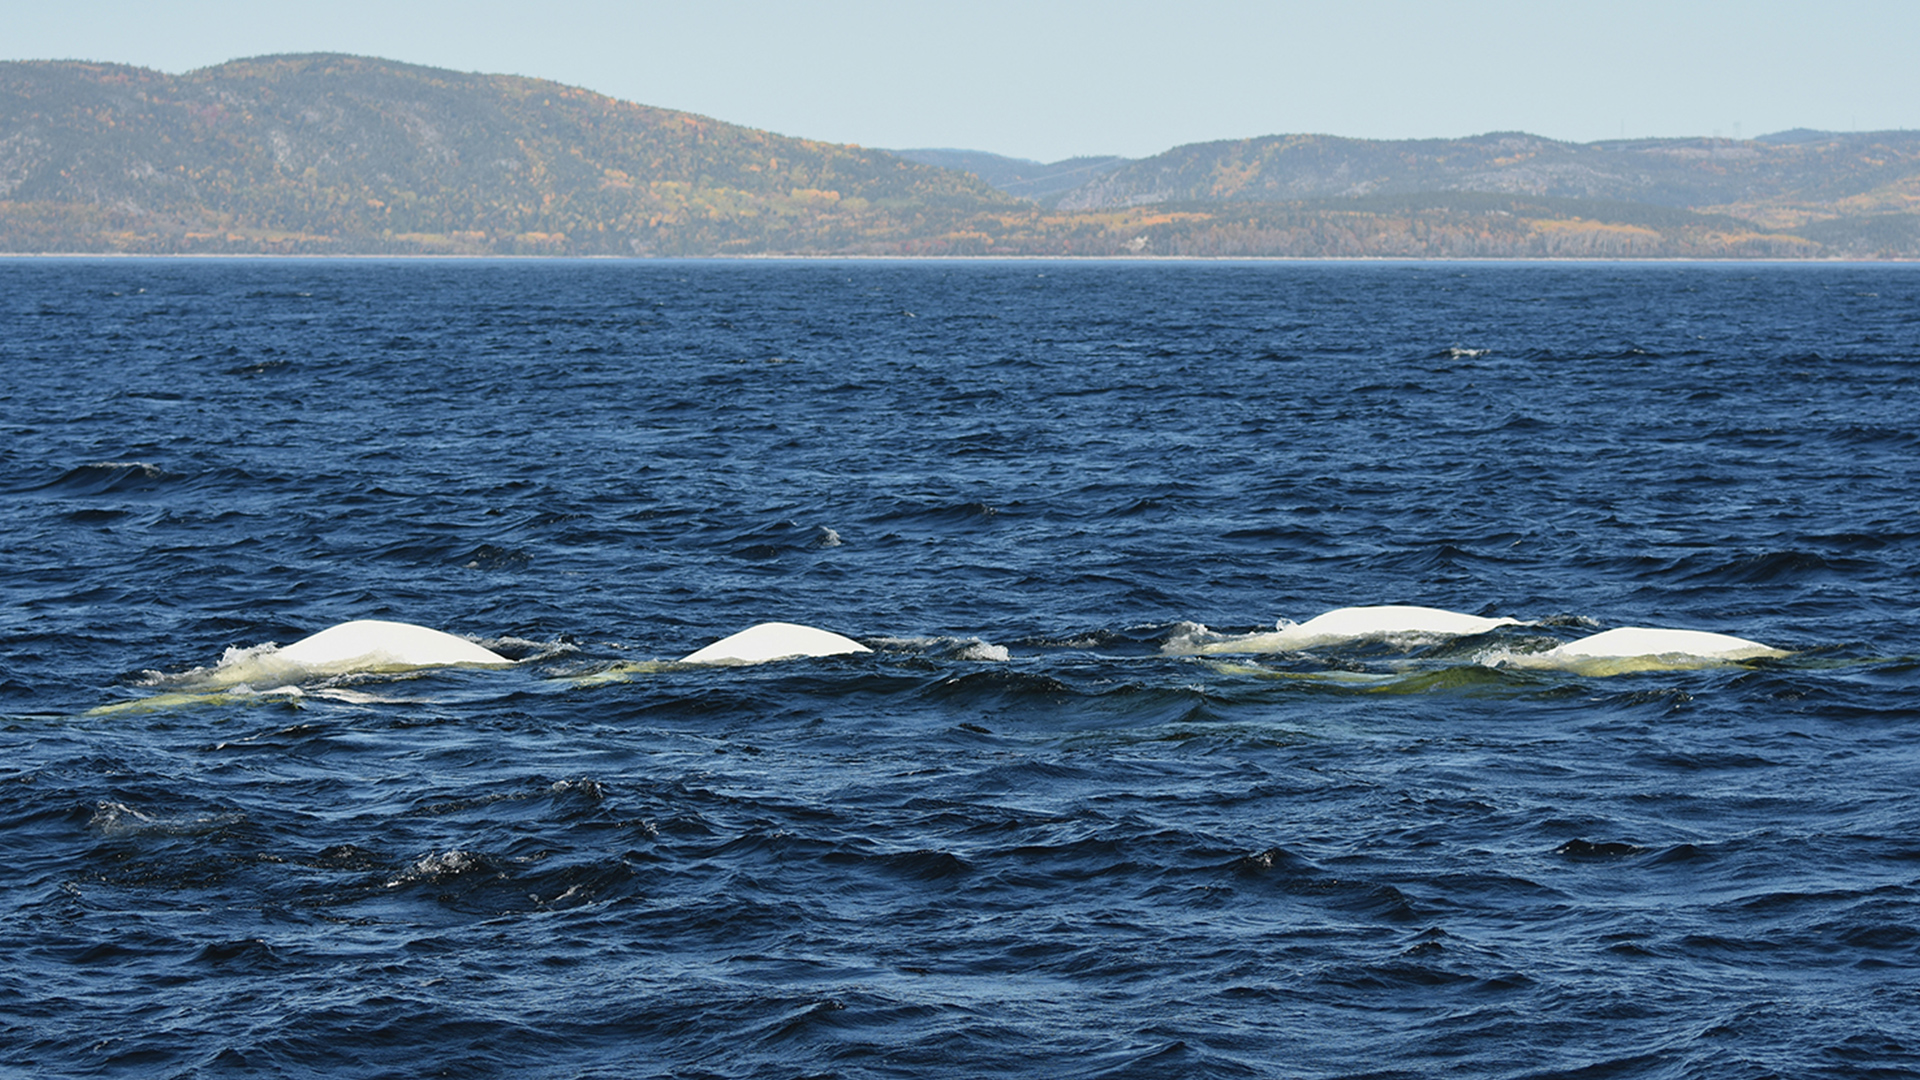 Near a mountainous shoreline, the white backs of four belugas break the surface and another two can be seen through the clear water.